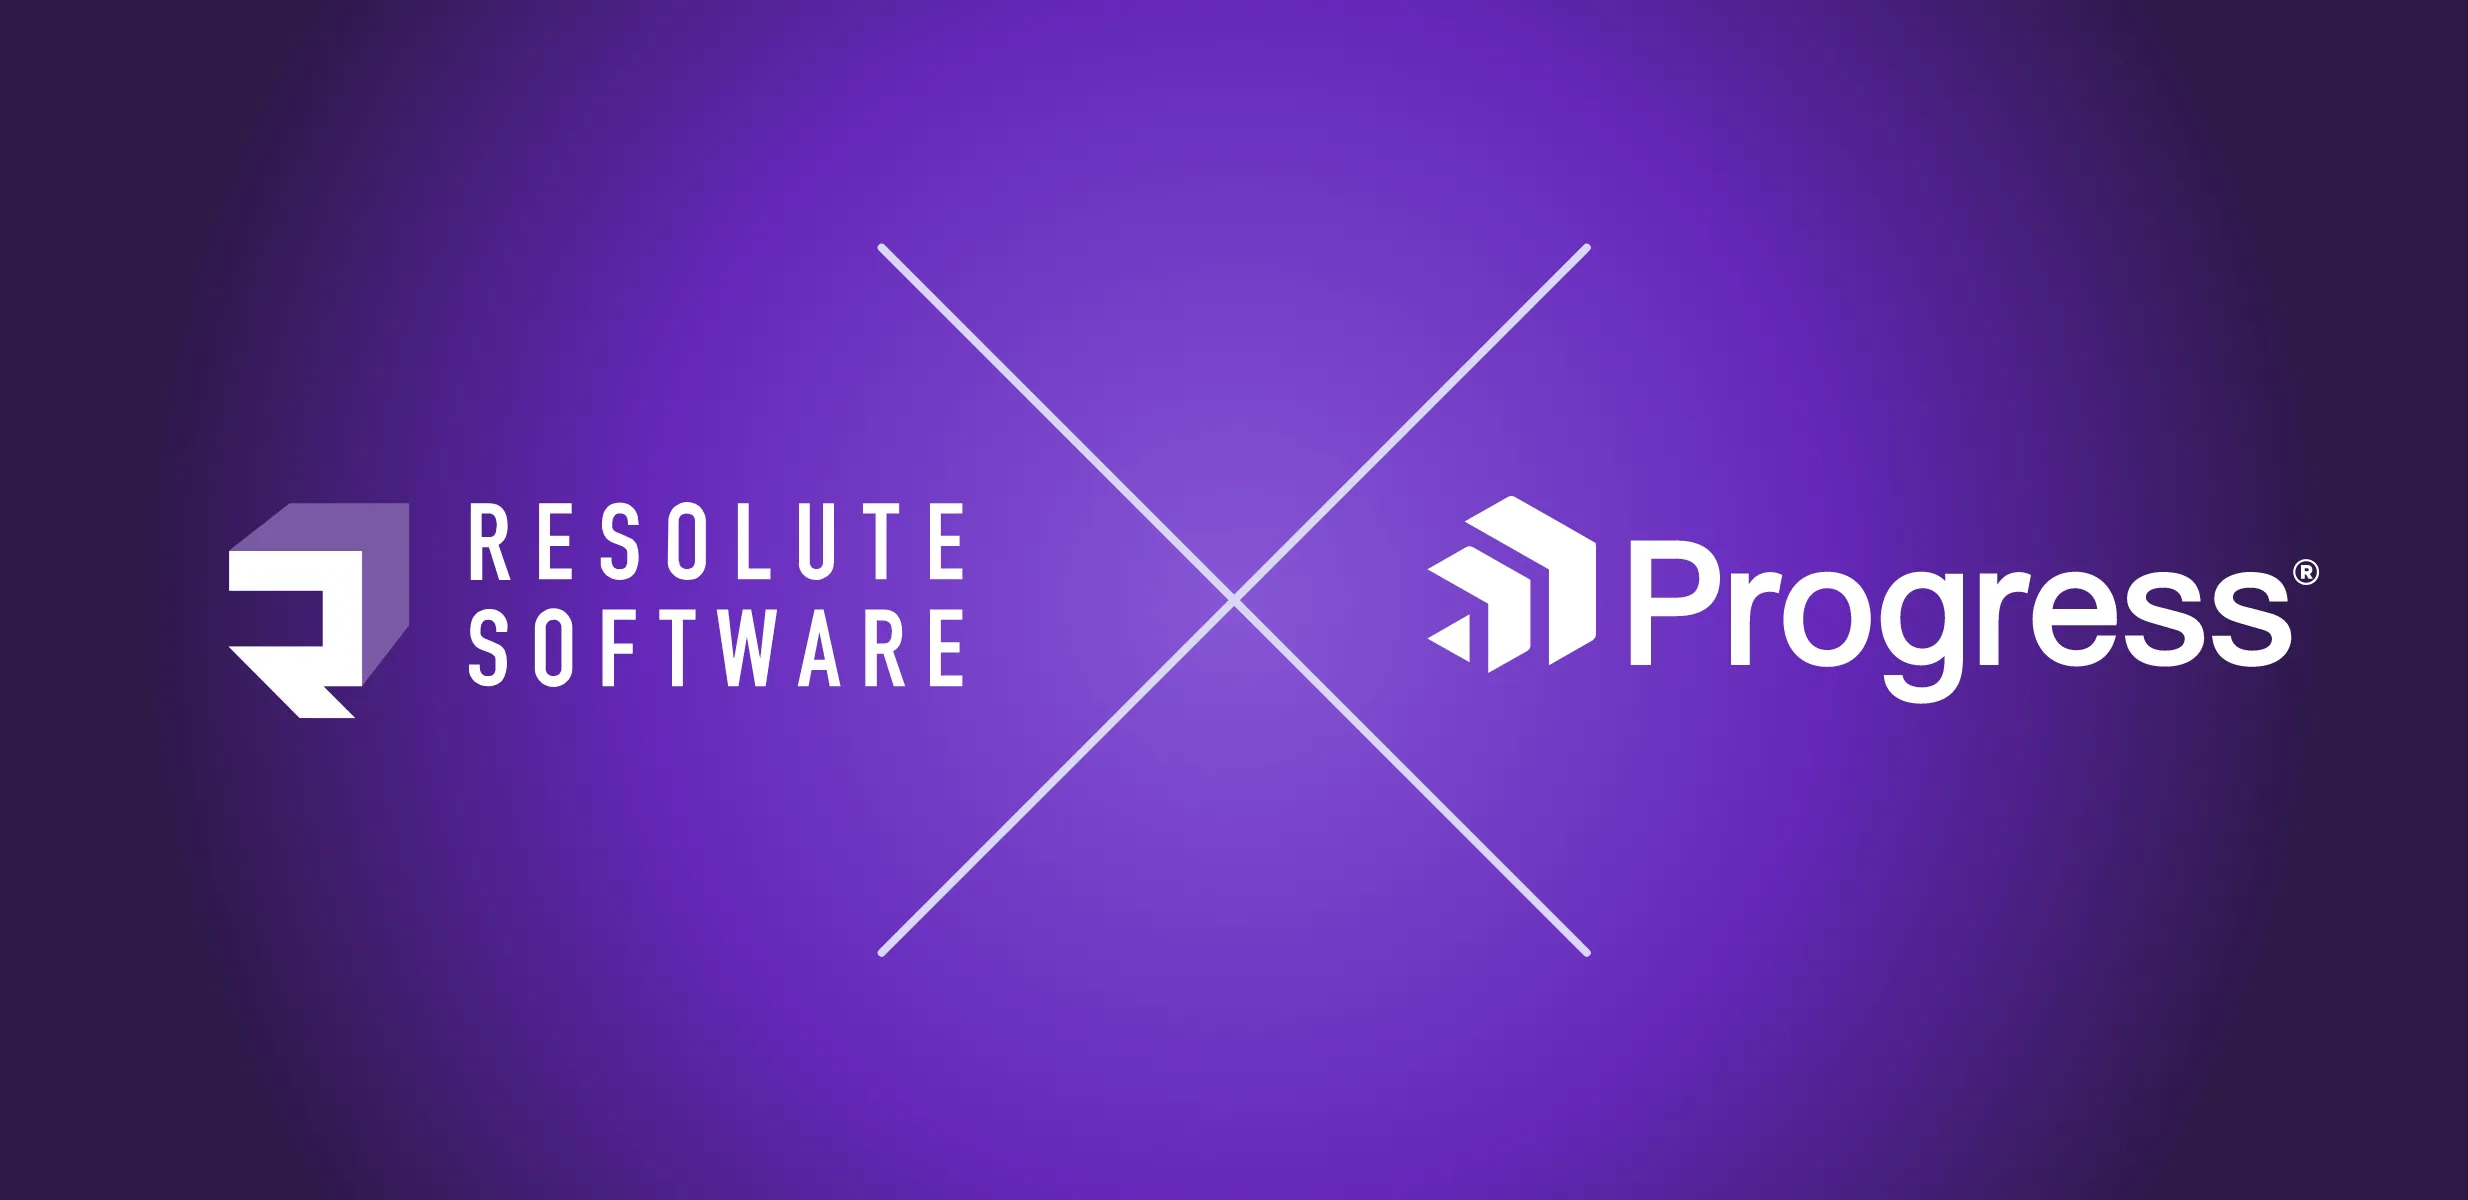 Resolute Software Partners With Progress Resolute Web